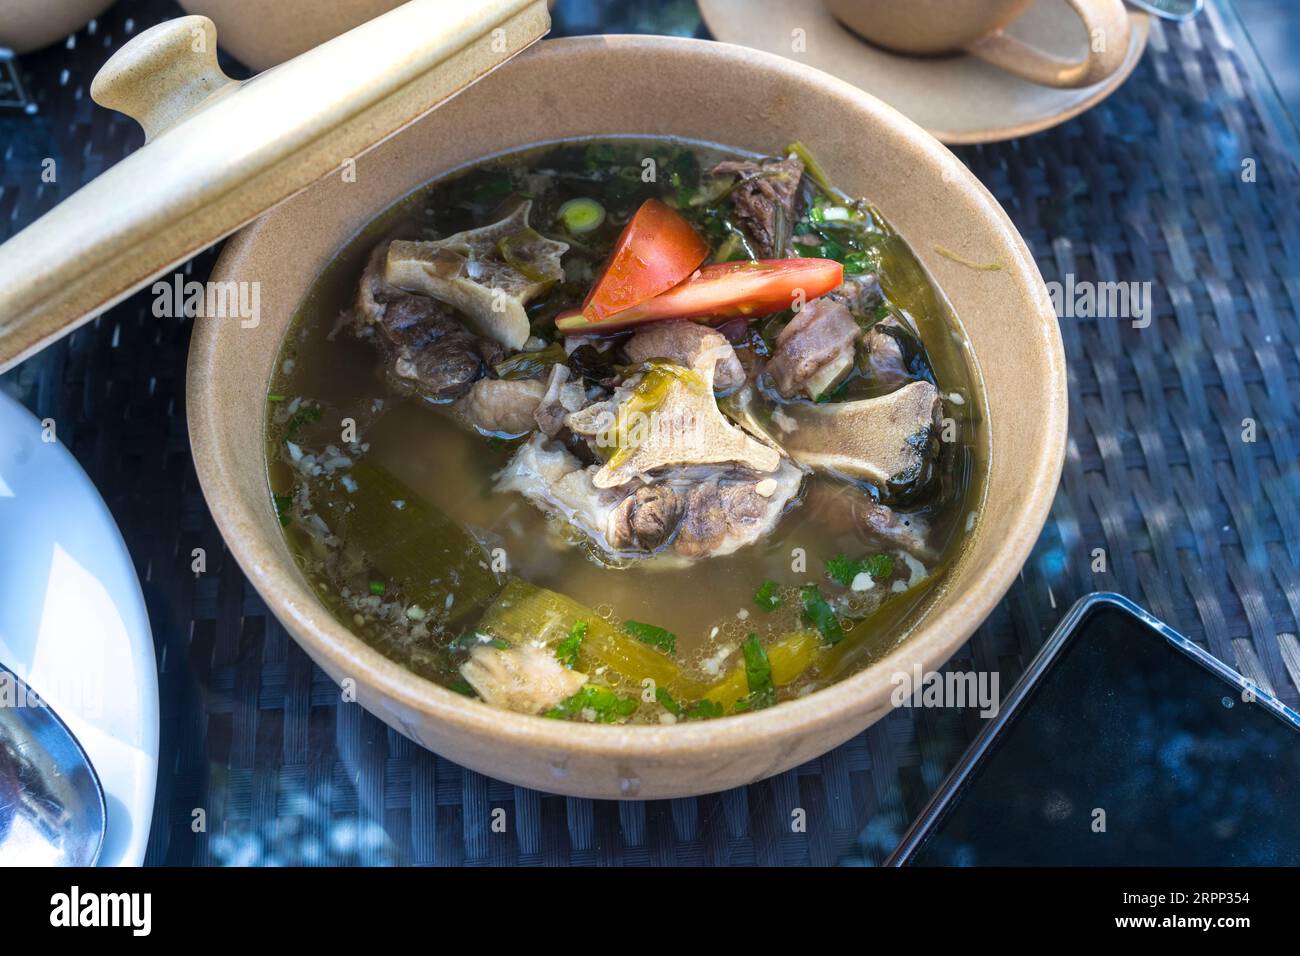 Traditional Indonesian Oxtail Soup served in a ceramic bowl with an open lid. Rich and flavorful featuring tender oxtail meat served in a savory broth Stock Photo